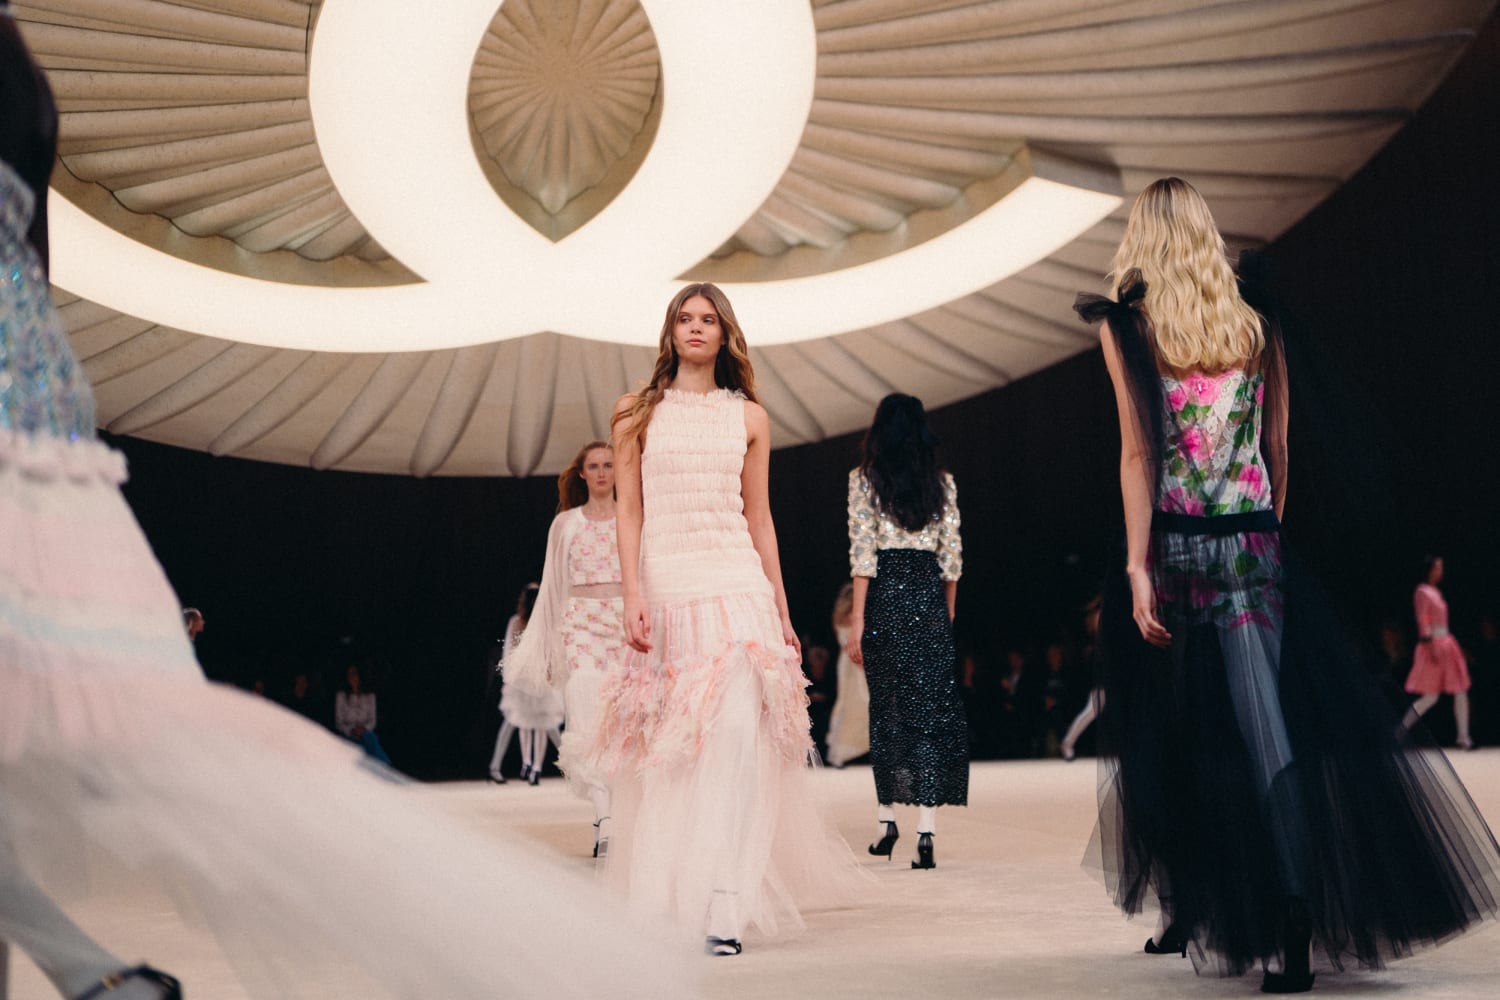 Chanel runway show. Large Chanel logo emblazoned on the ceiling with a group of models walking.